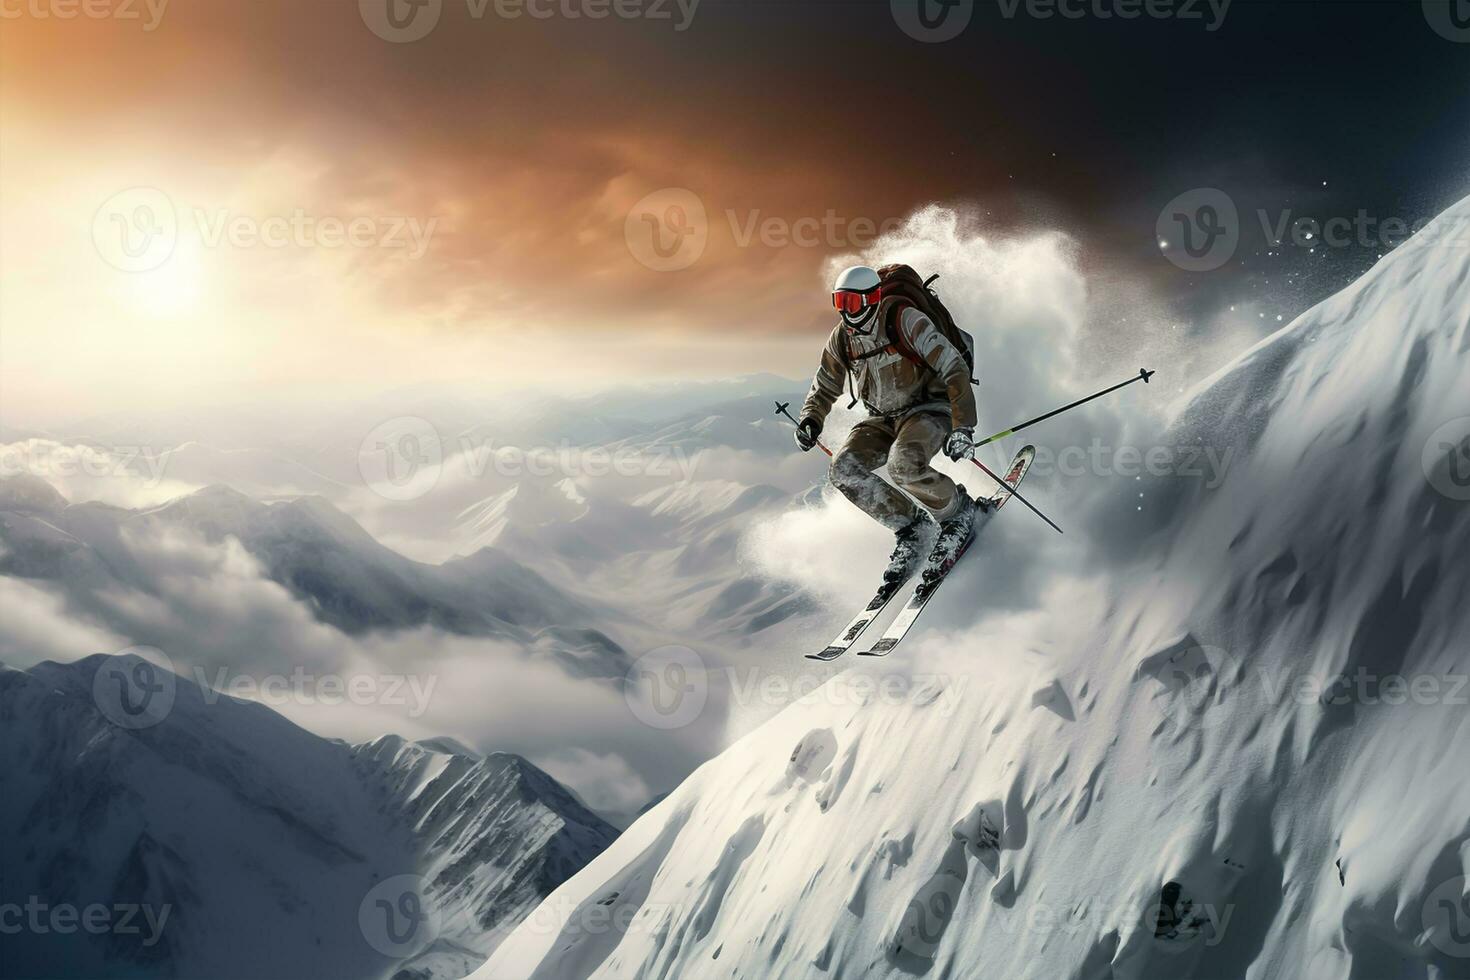 Skier skiing downhill in high mountains at sunset photo